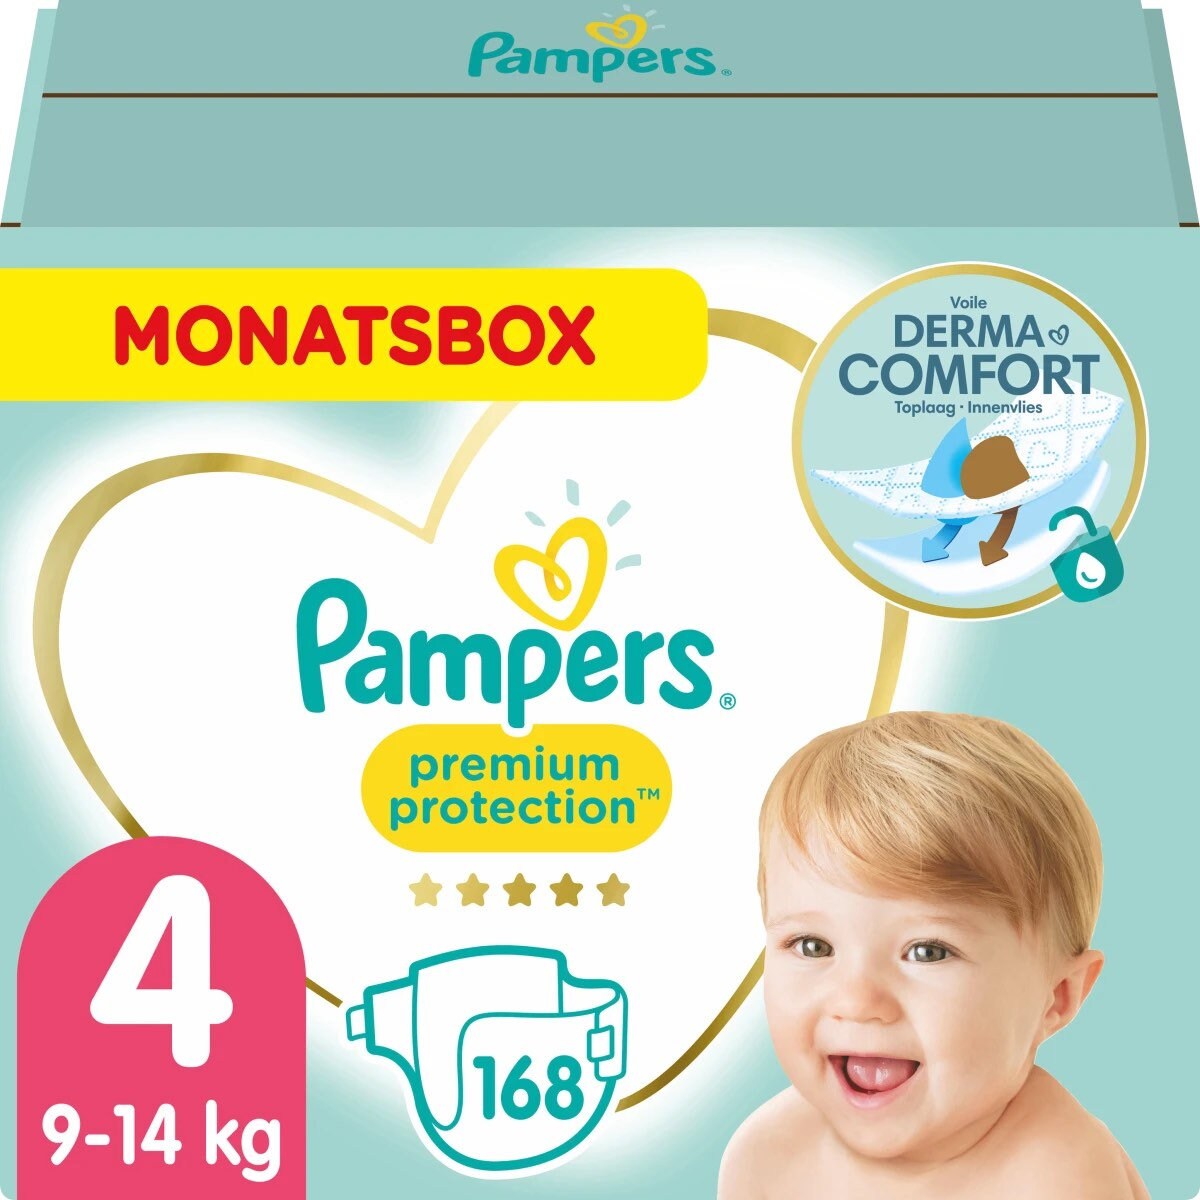 Pampers Diaper Premium Protection Monthly Box 168pcs Size 4